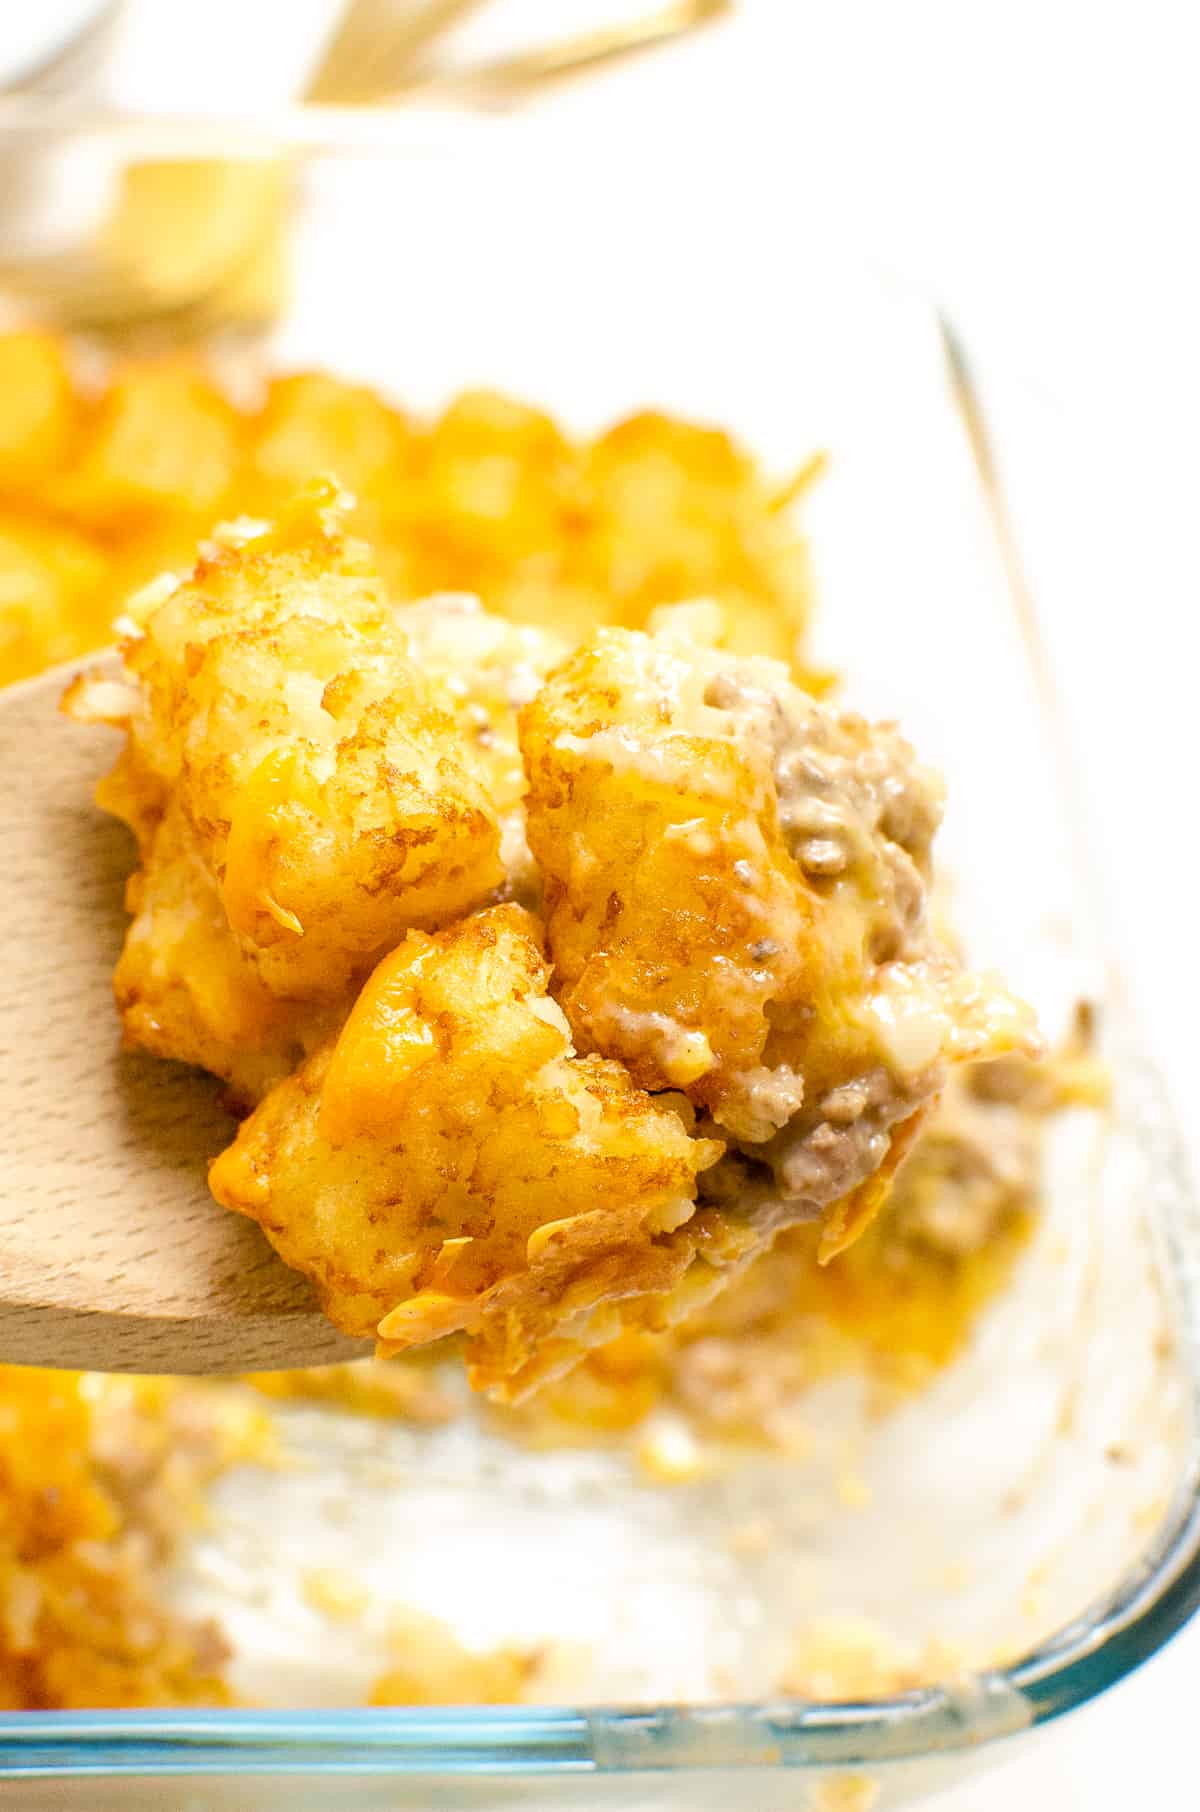 Wooden spoon full of tater tot casserole with ground beef and cheese